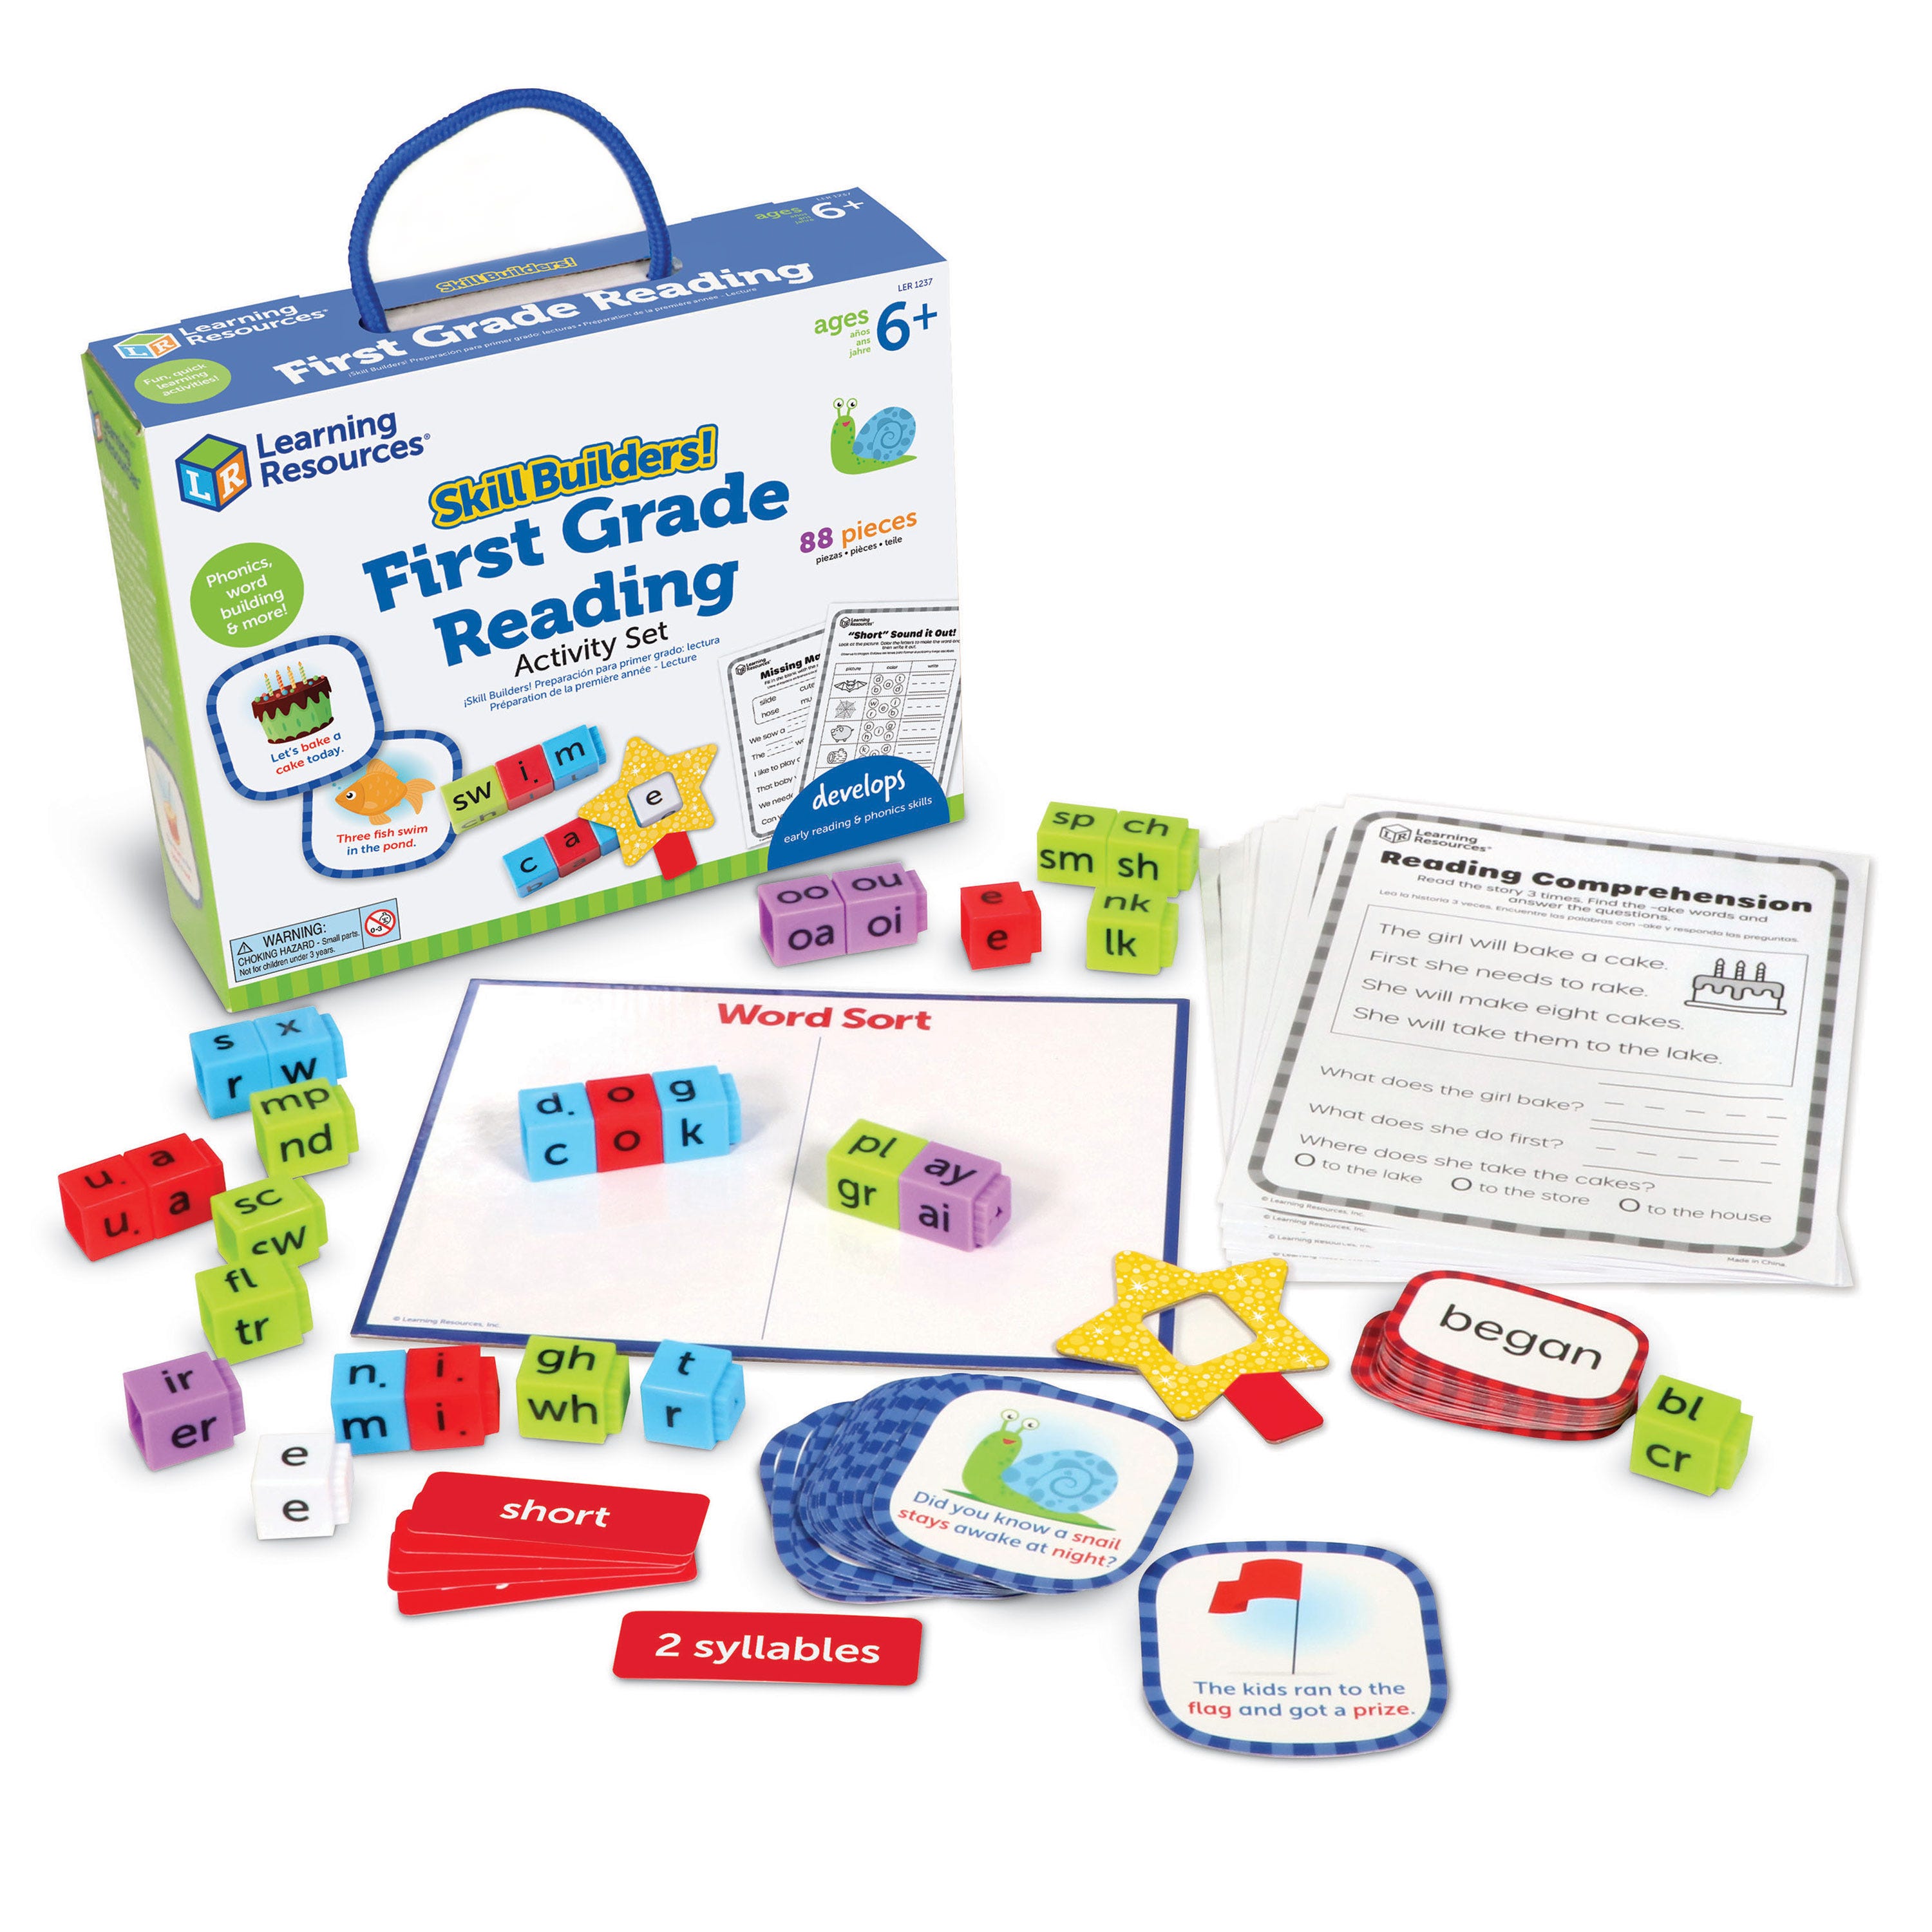 Learning Resources - Skill Builders First Grade Reading Activity Set